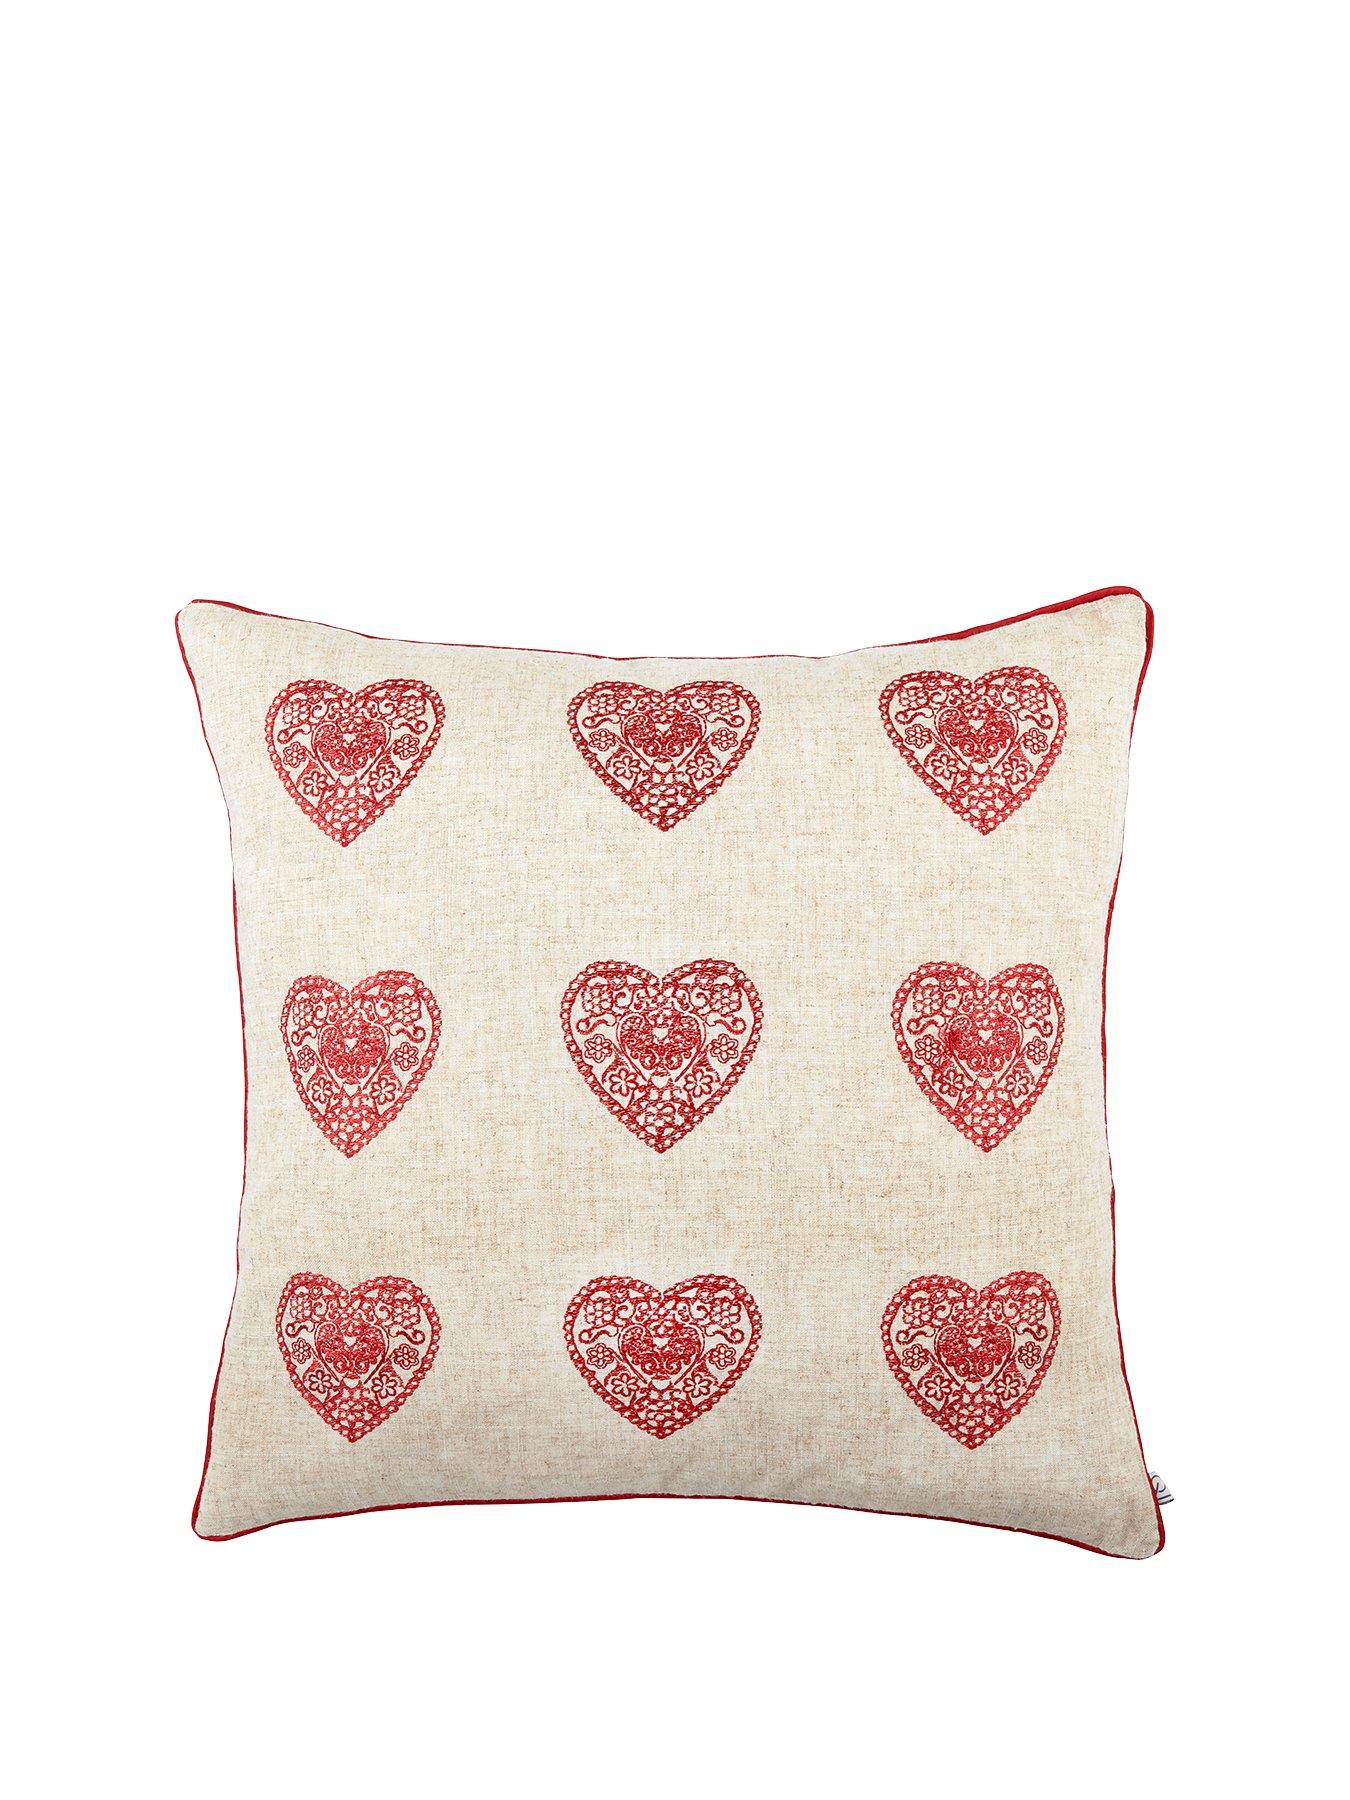 Catherine Lansfield Vintage Hearts Cushion - Red | very.co.uk